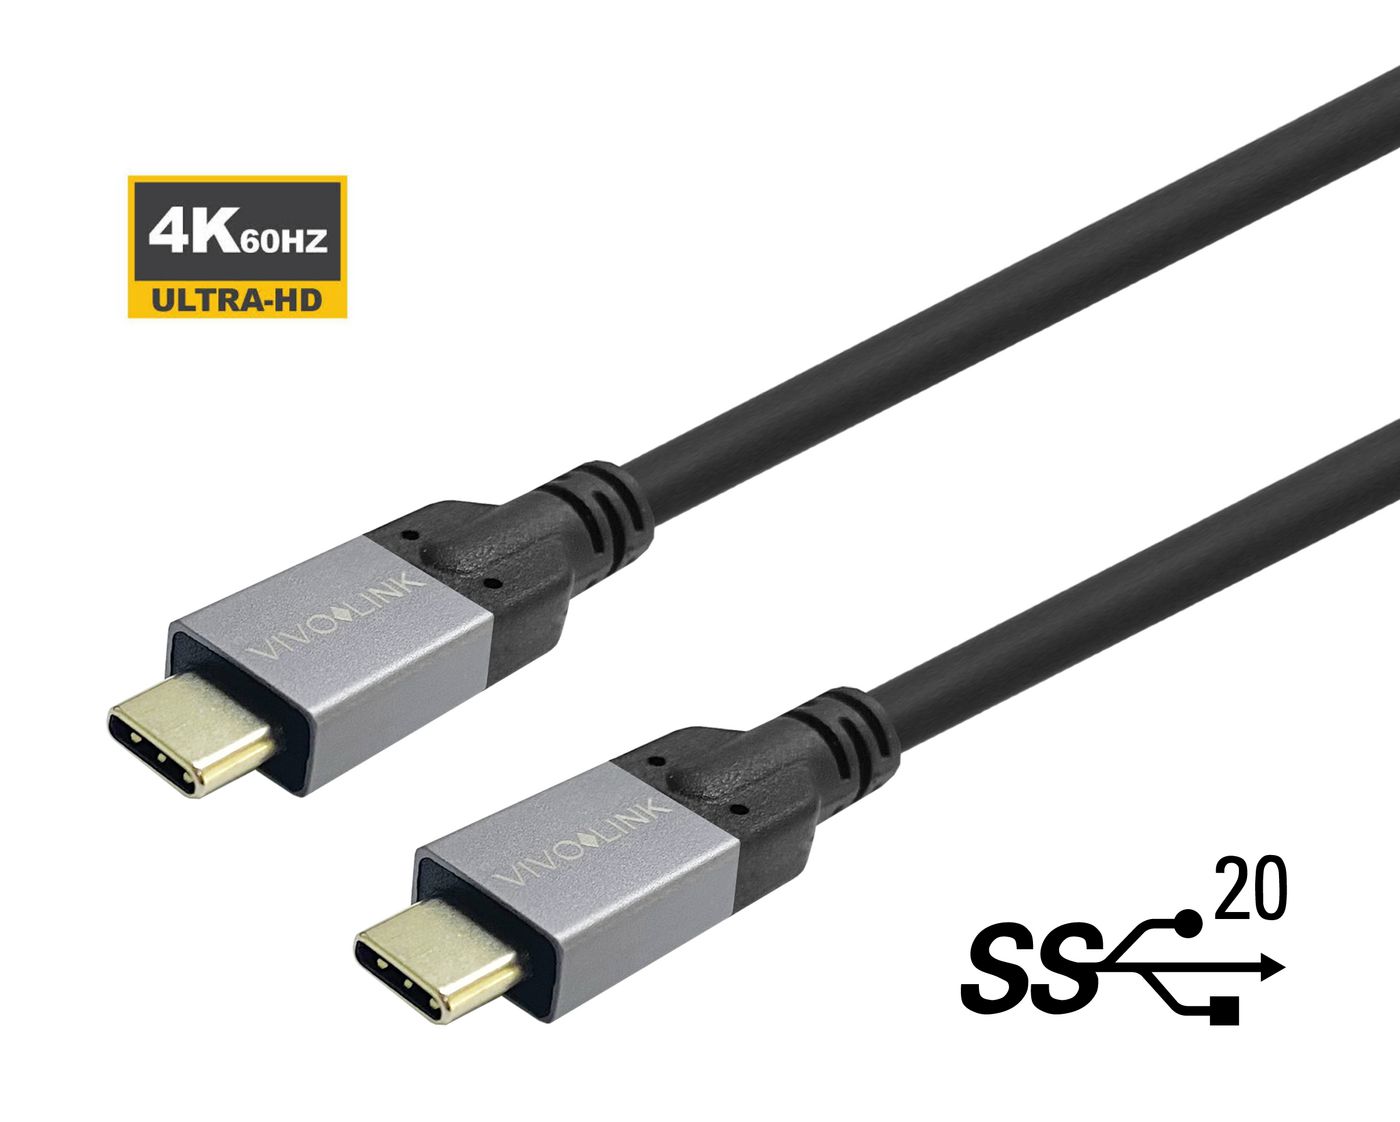 EET USB-C to Cable 4m Supports 20 Gbps data - Kabel - Digital/Daten (PROUSBCMM4)